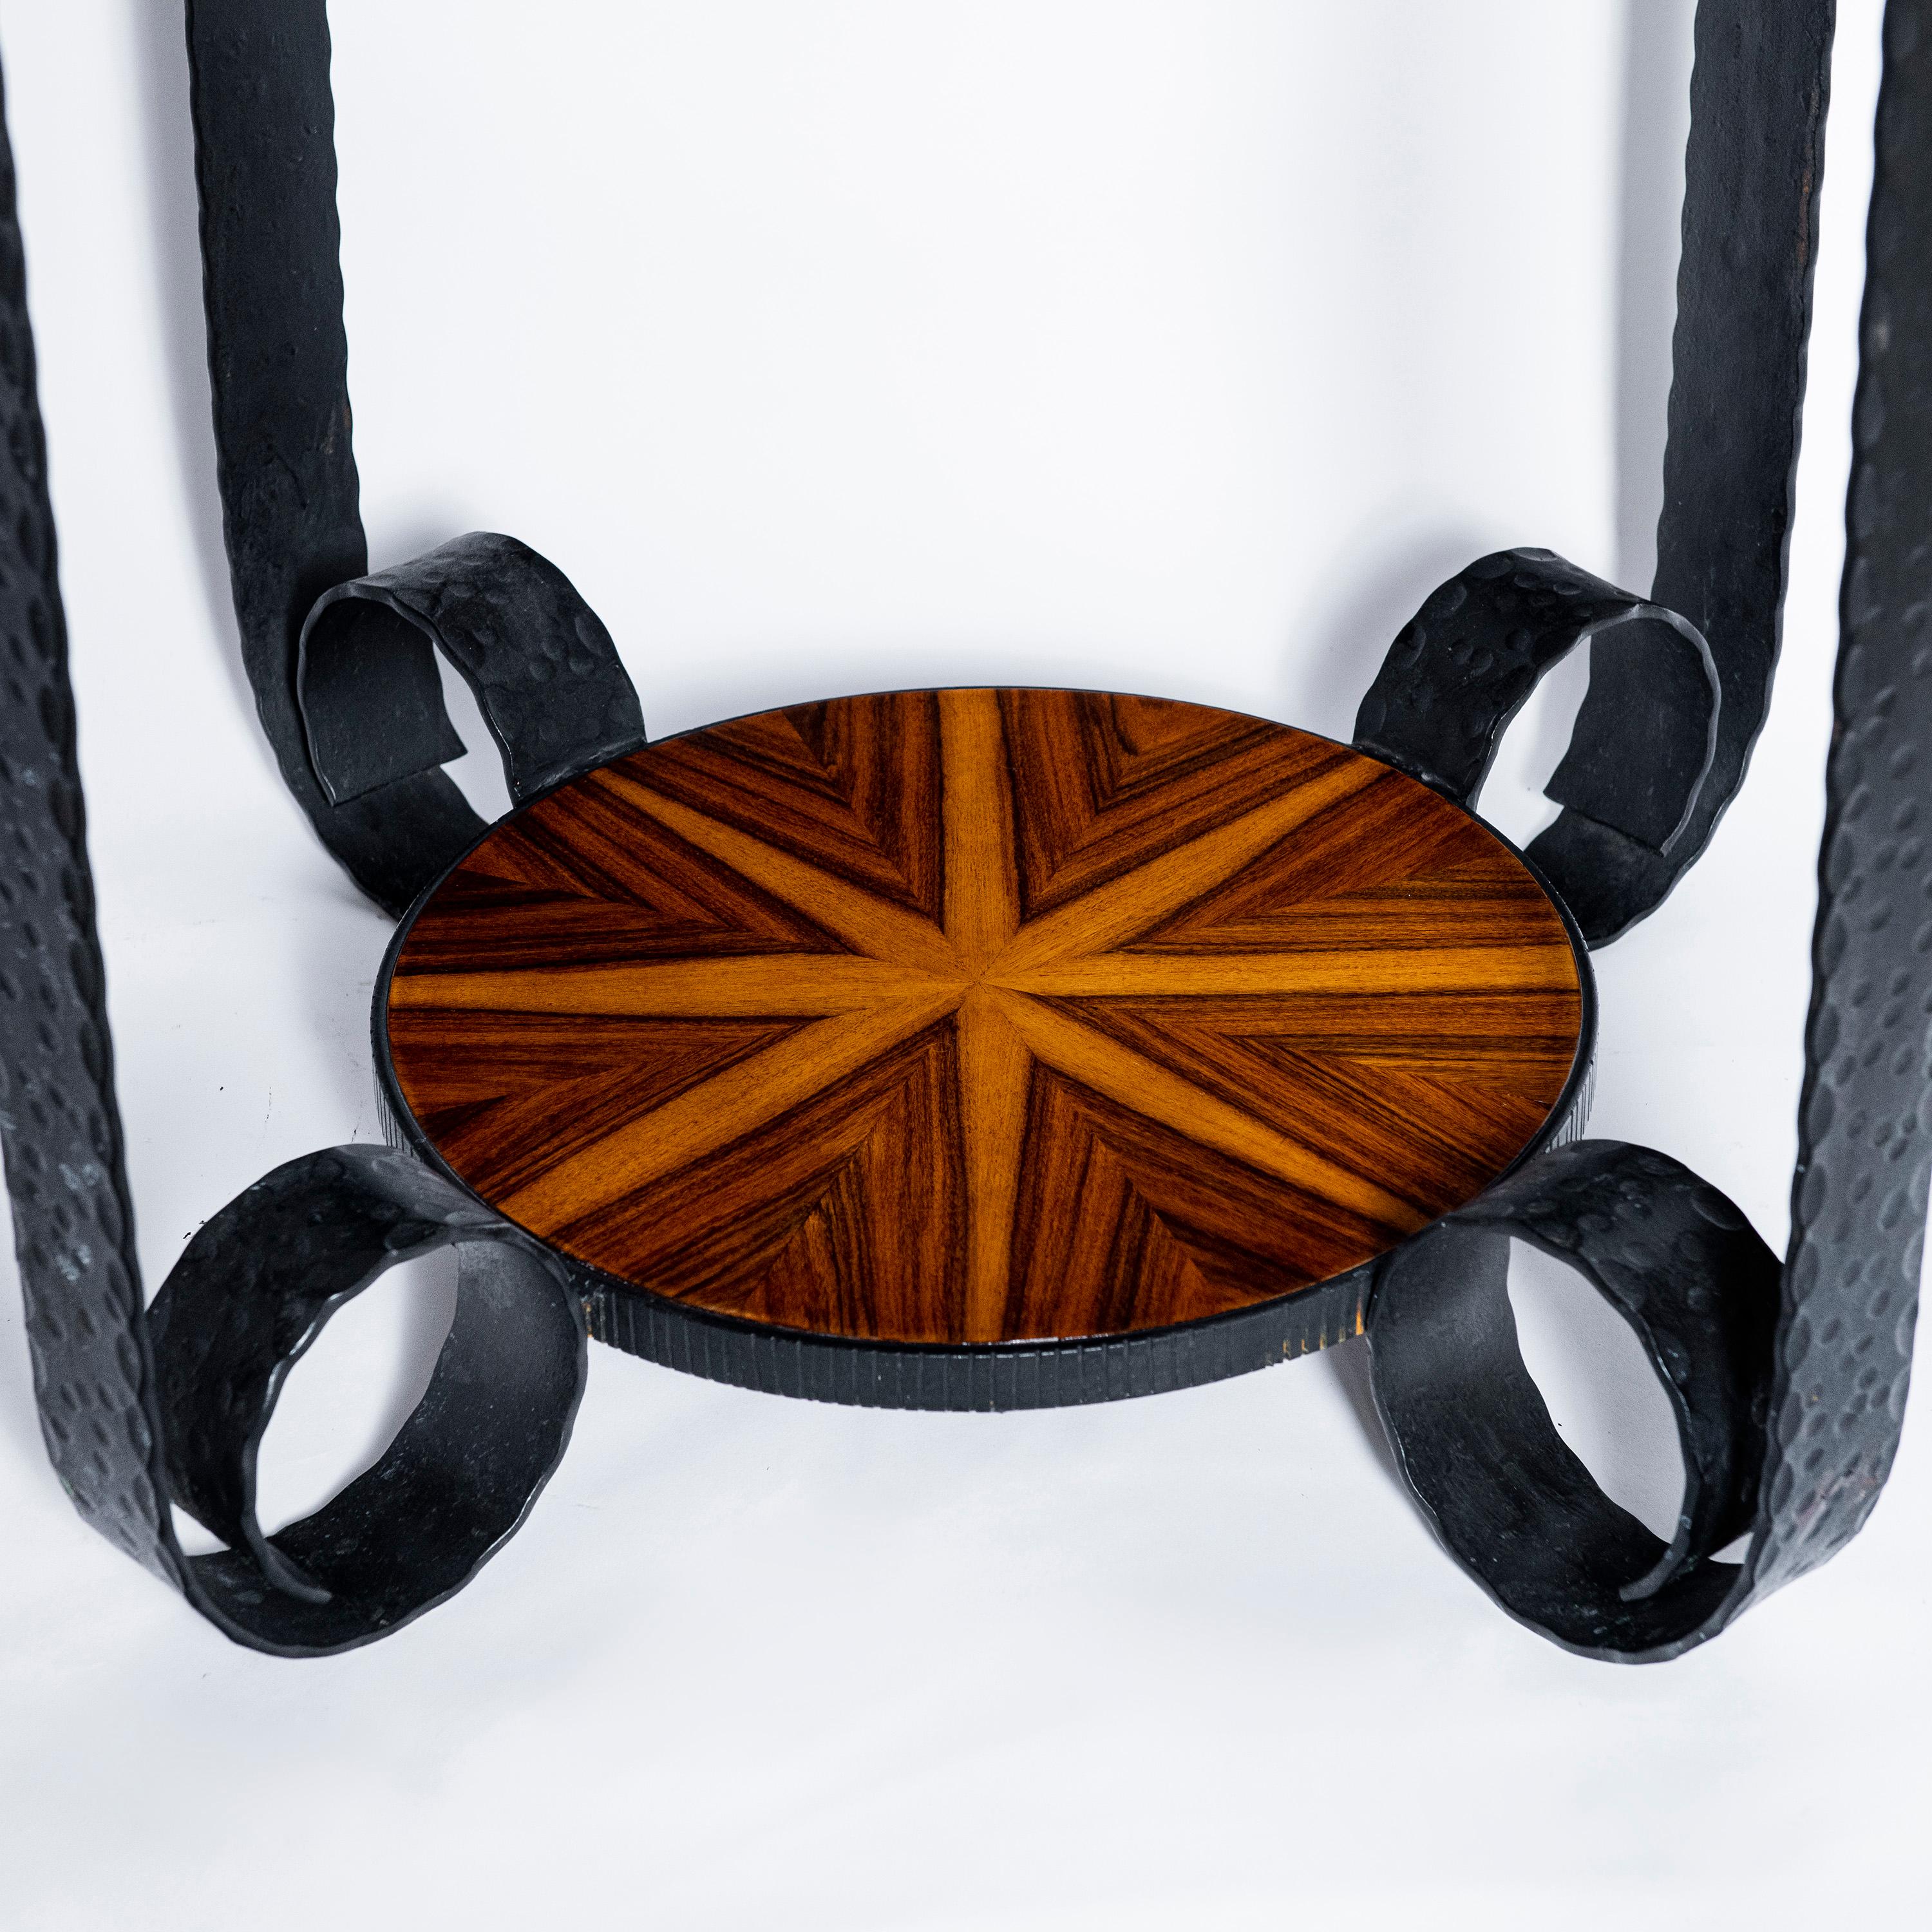 Pair of Wood and Iron Side Tables, Art Deco Period, France, circa 1930 For Sale 1